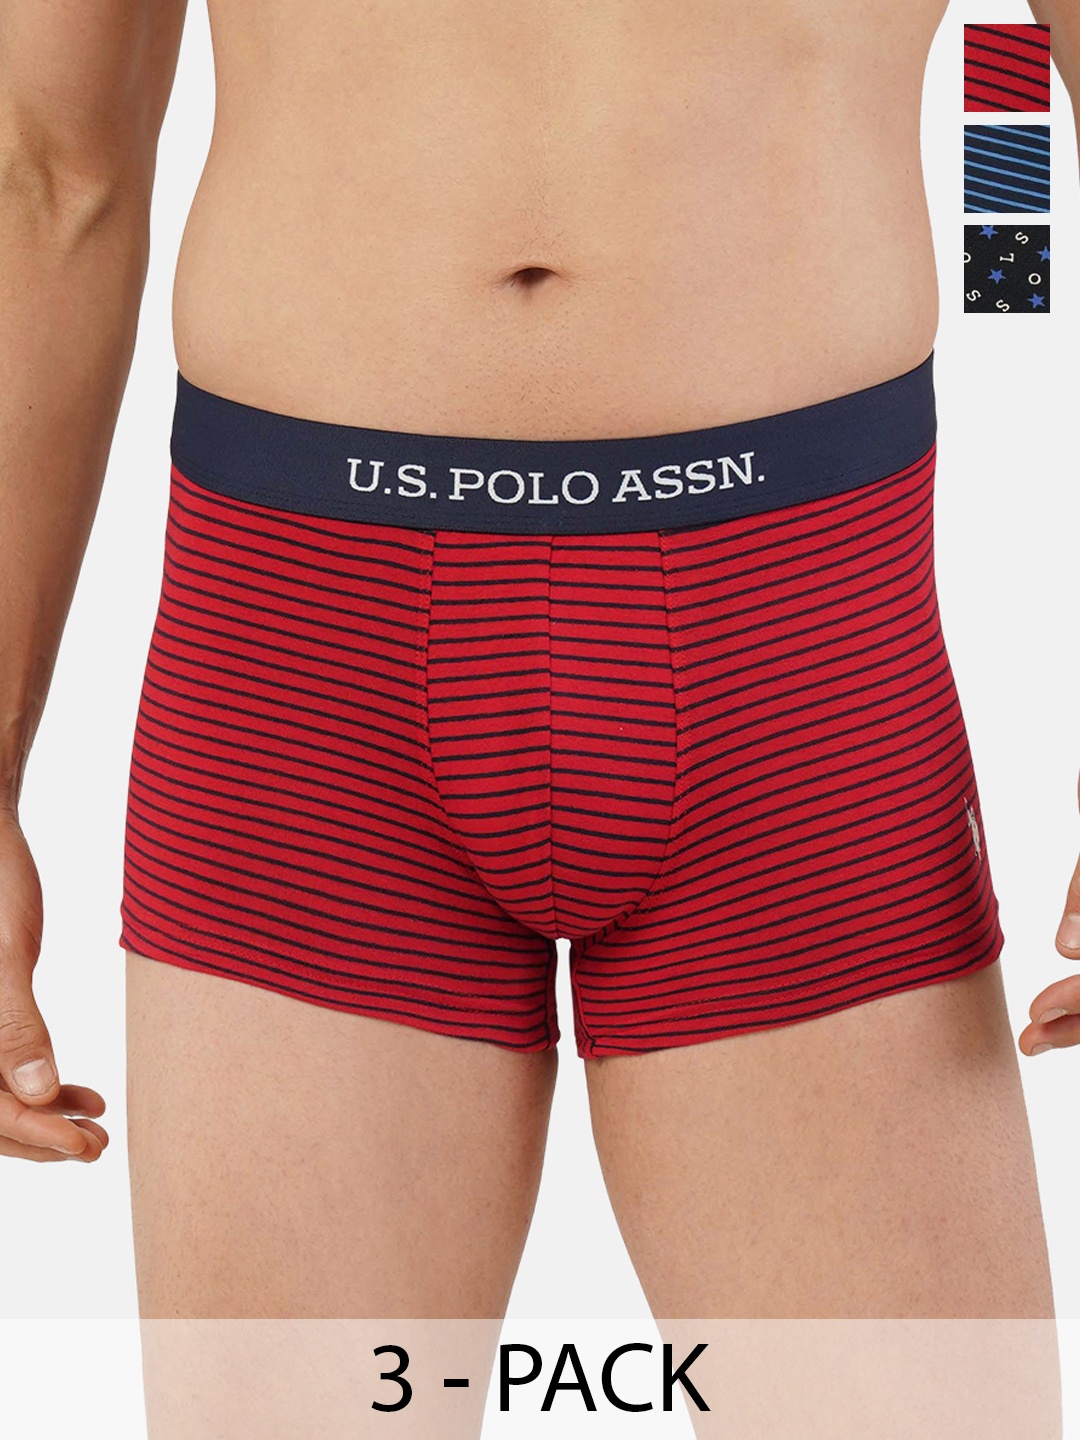 

U.S. Polo Assn. Pack of 3 Trunks 20416336-1-21275922-1, Red